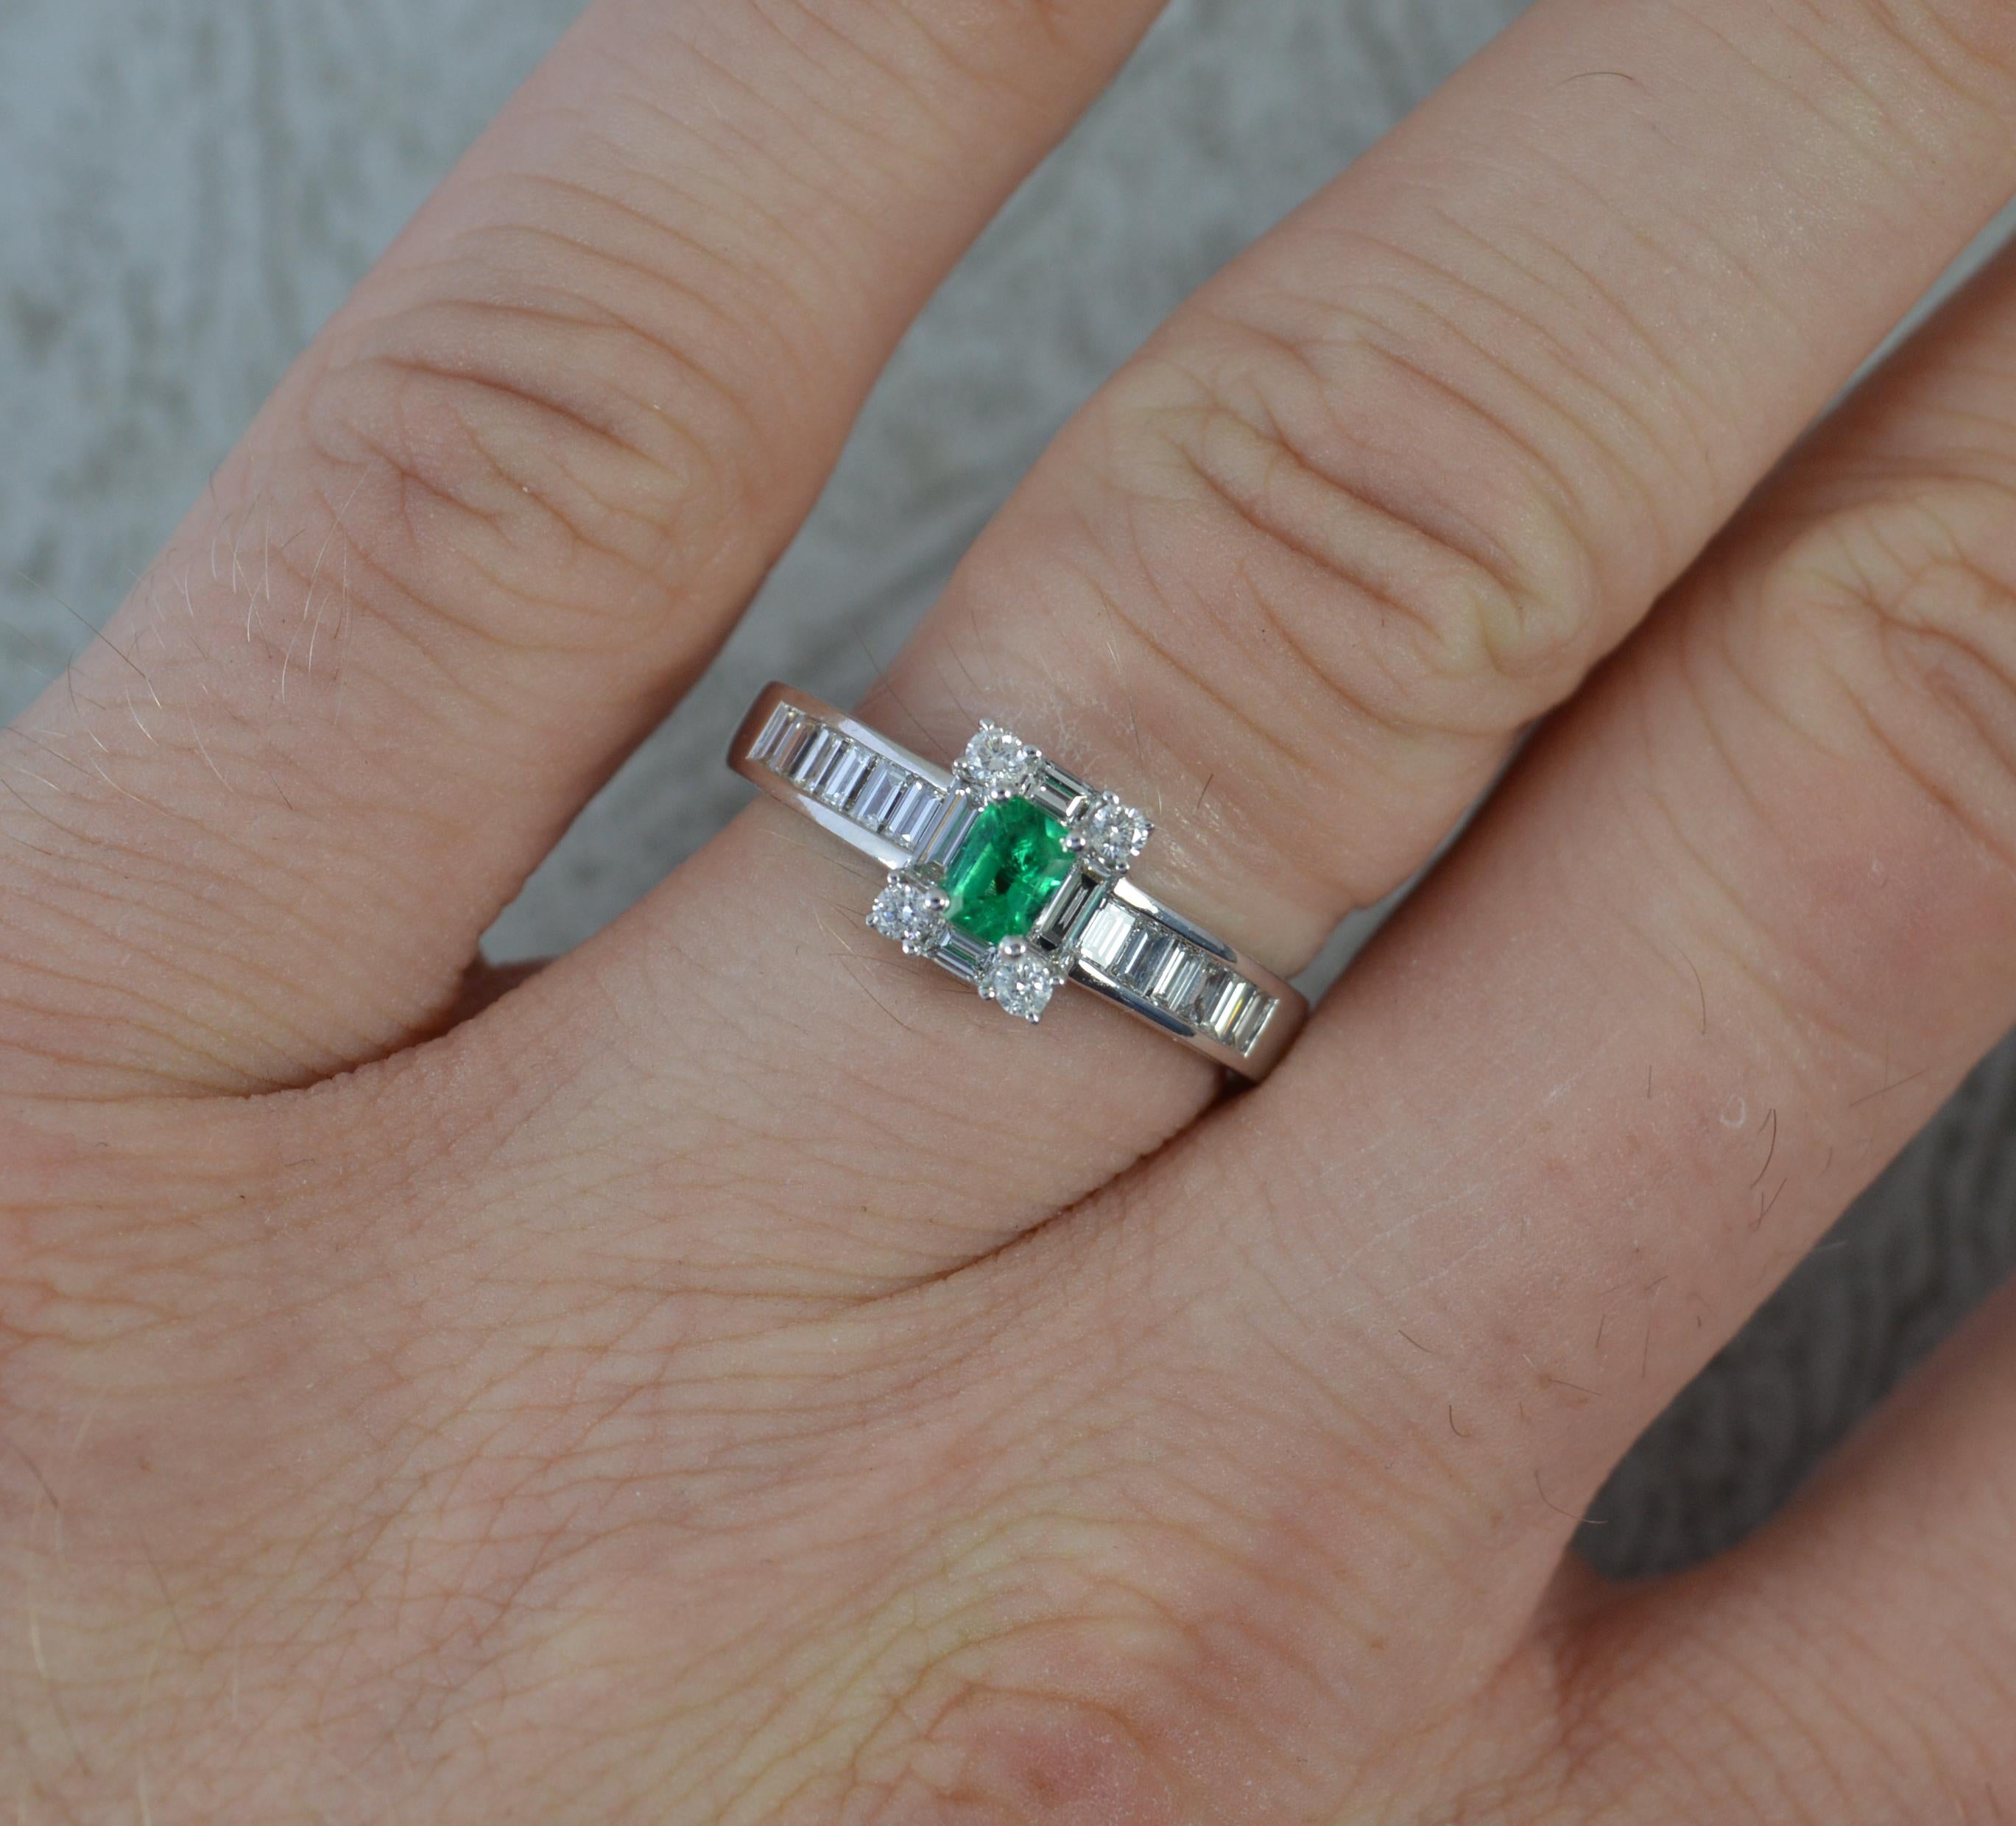 A stunning Emerald and Diamond cluster ring.
Modelled in an 18ct white gold example.
Designed with an emerald cut emerald to centre in four claw setting. Clean and vibrant. Surrounding are four emerald and four round brilliant cut diamonds creating